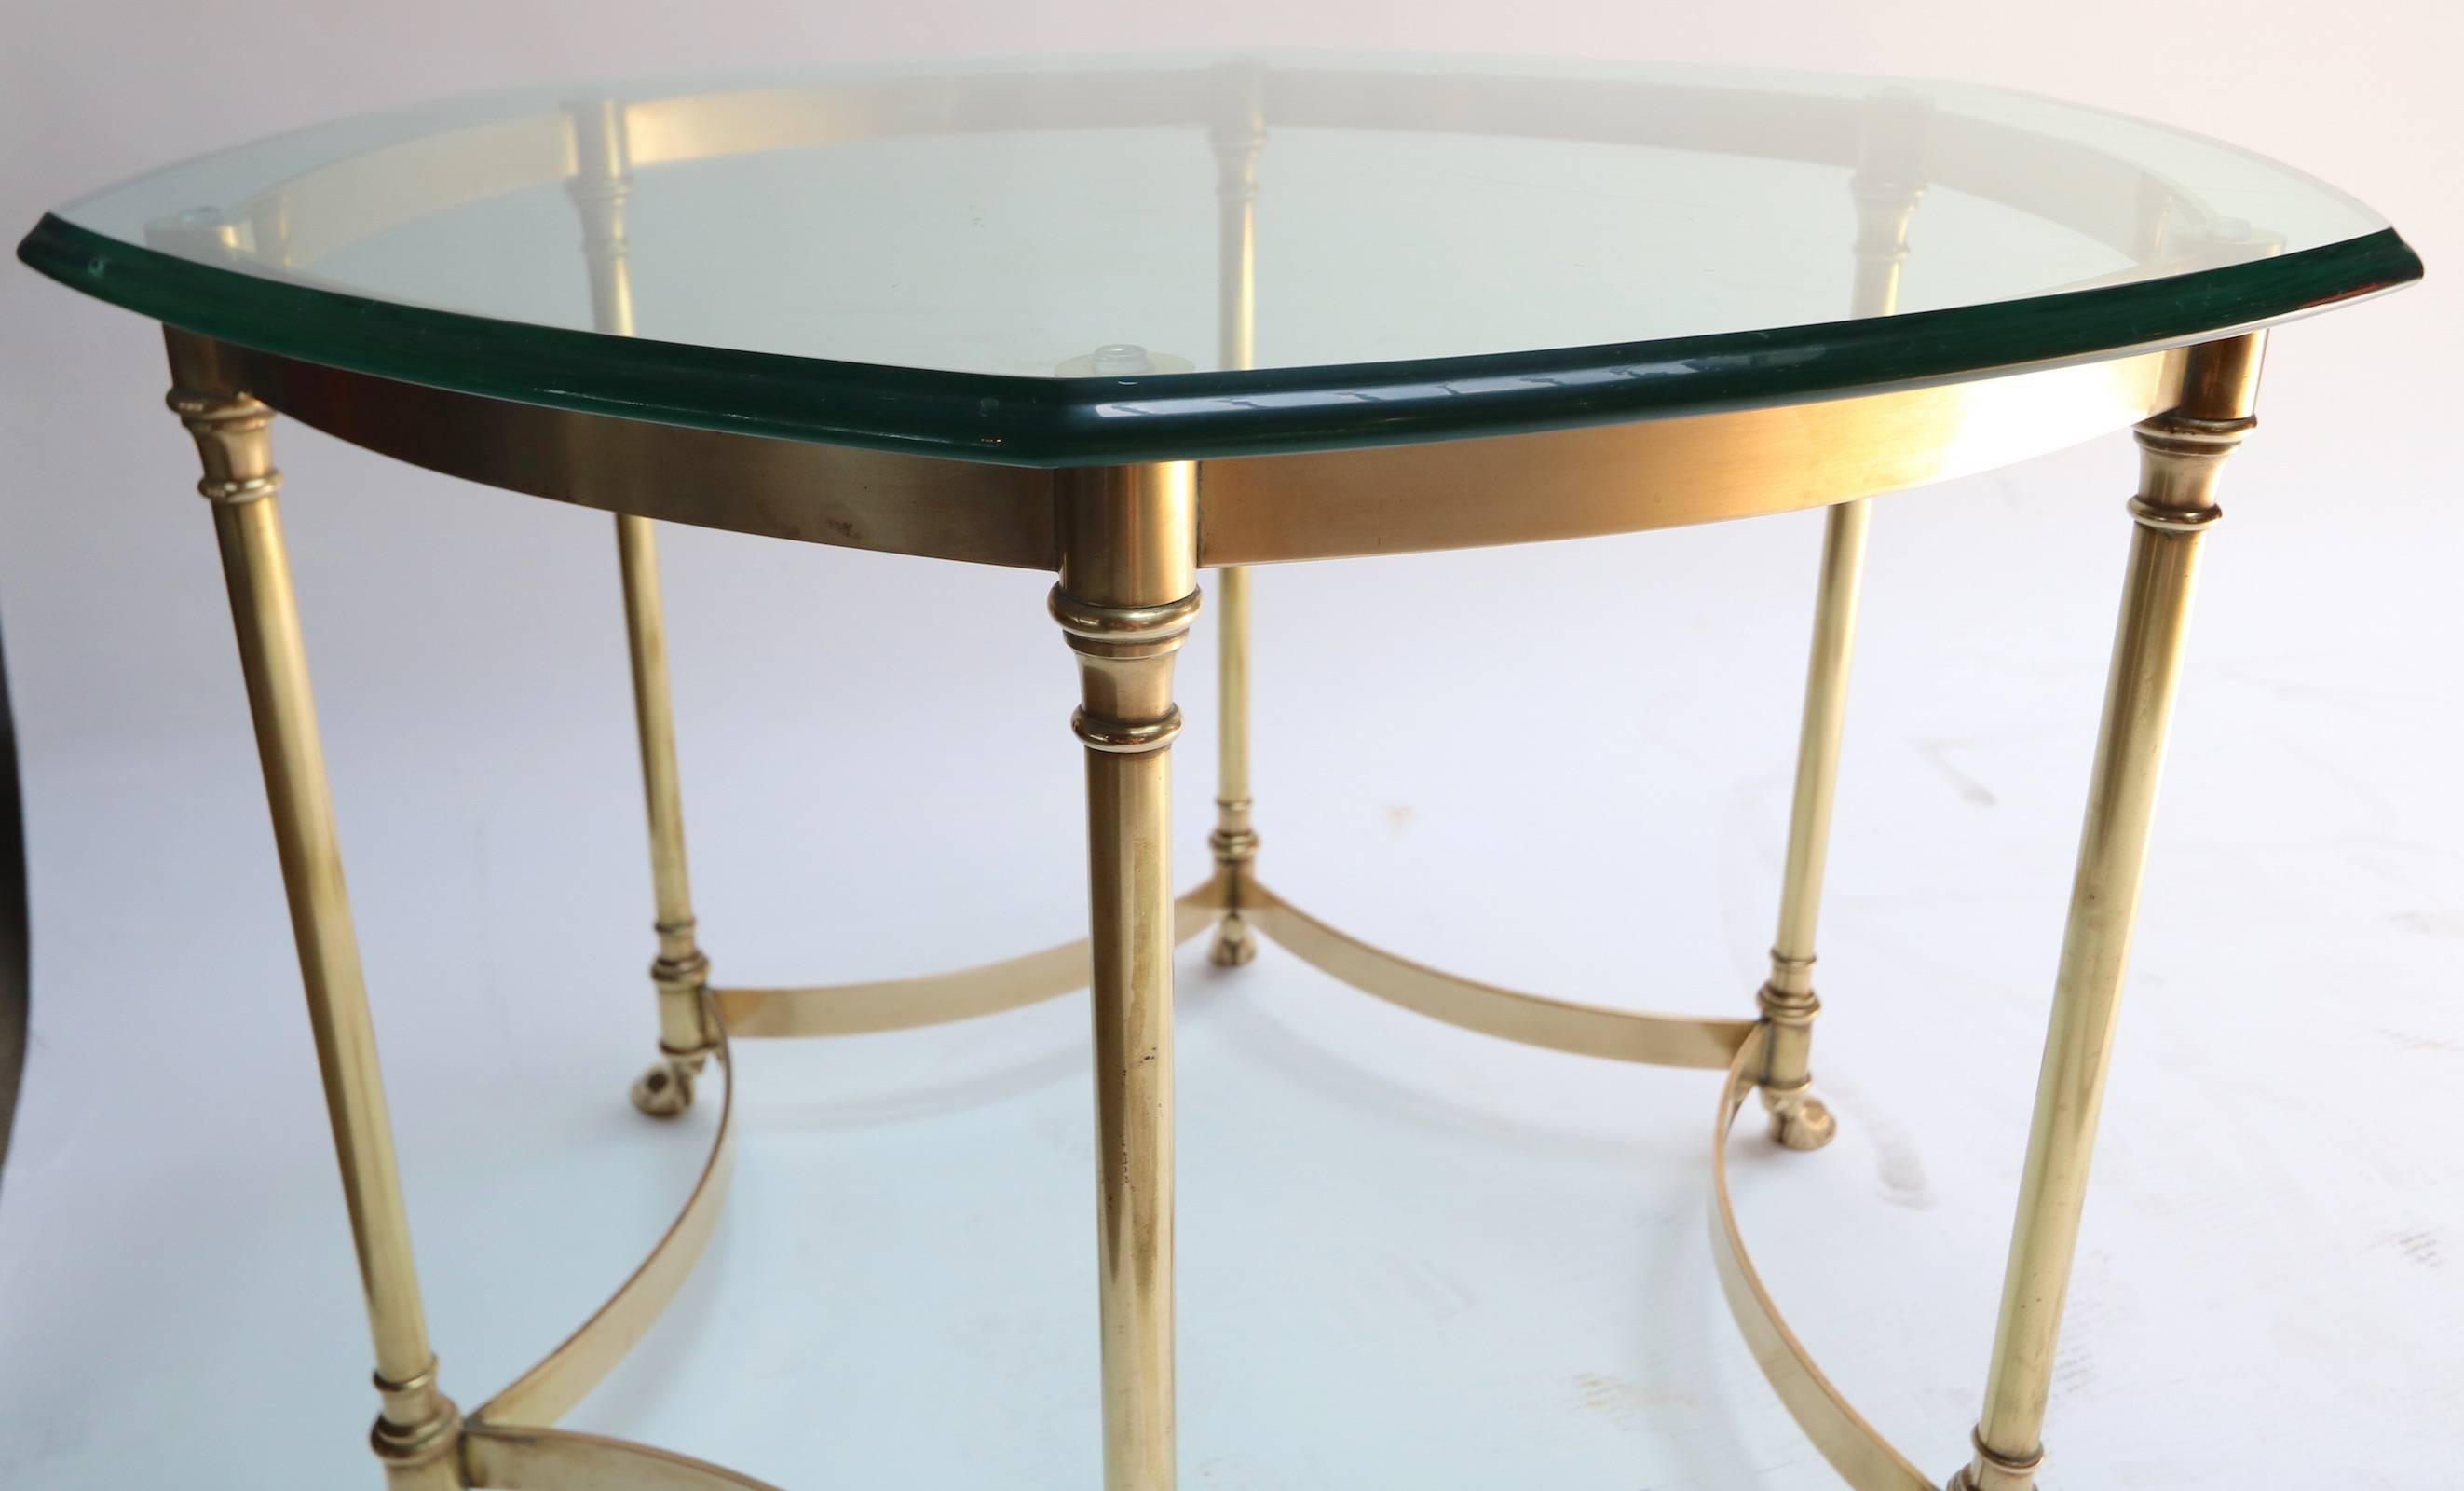 Italian Hexagonal Brass Side Table with Glass Top and Goat Feet